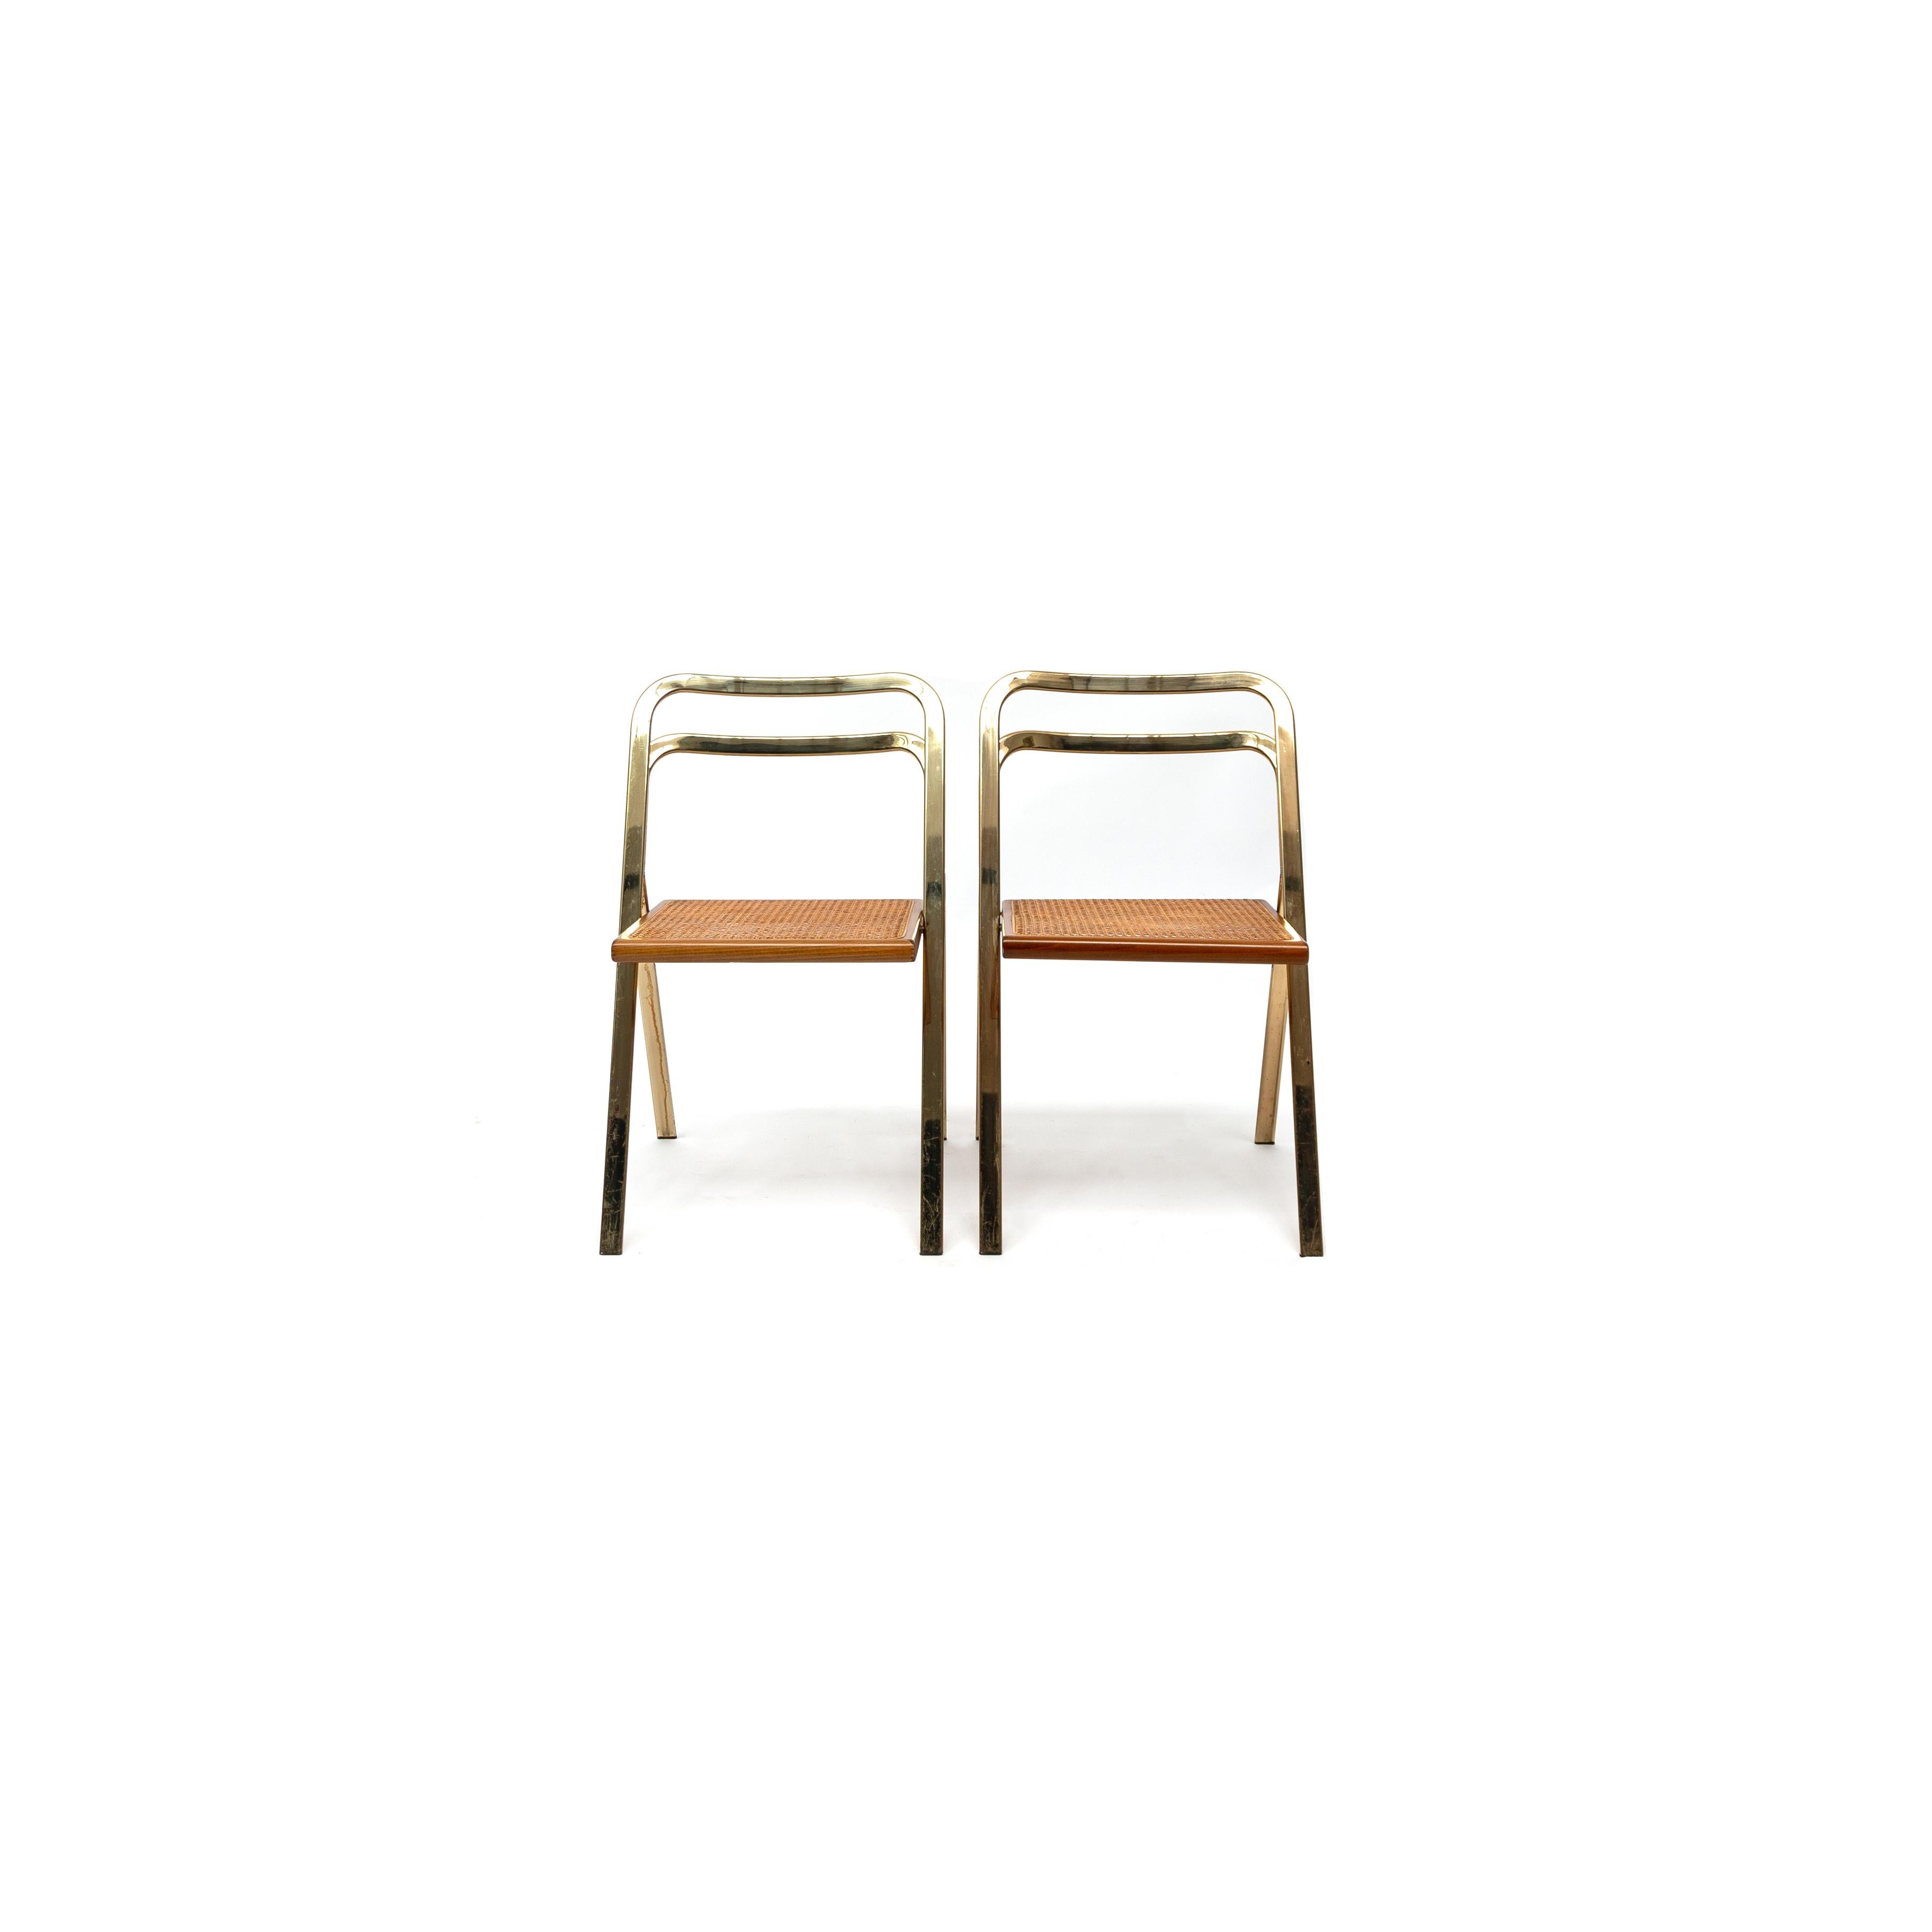 Set of 2 folding chairs by Giorgio Catellan for Cidue, Italy, 1970. These chairs are a beautiful shaped design pattern model, very elegant and functional. They fit together in each other very efficiently. They have been manufactured by Cidue,